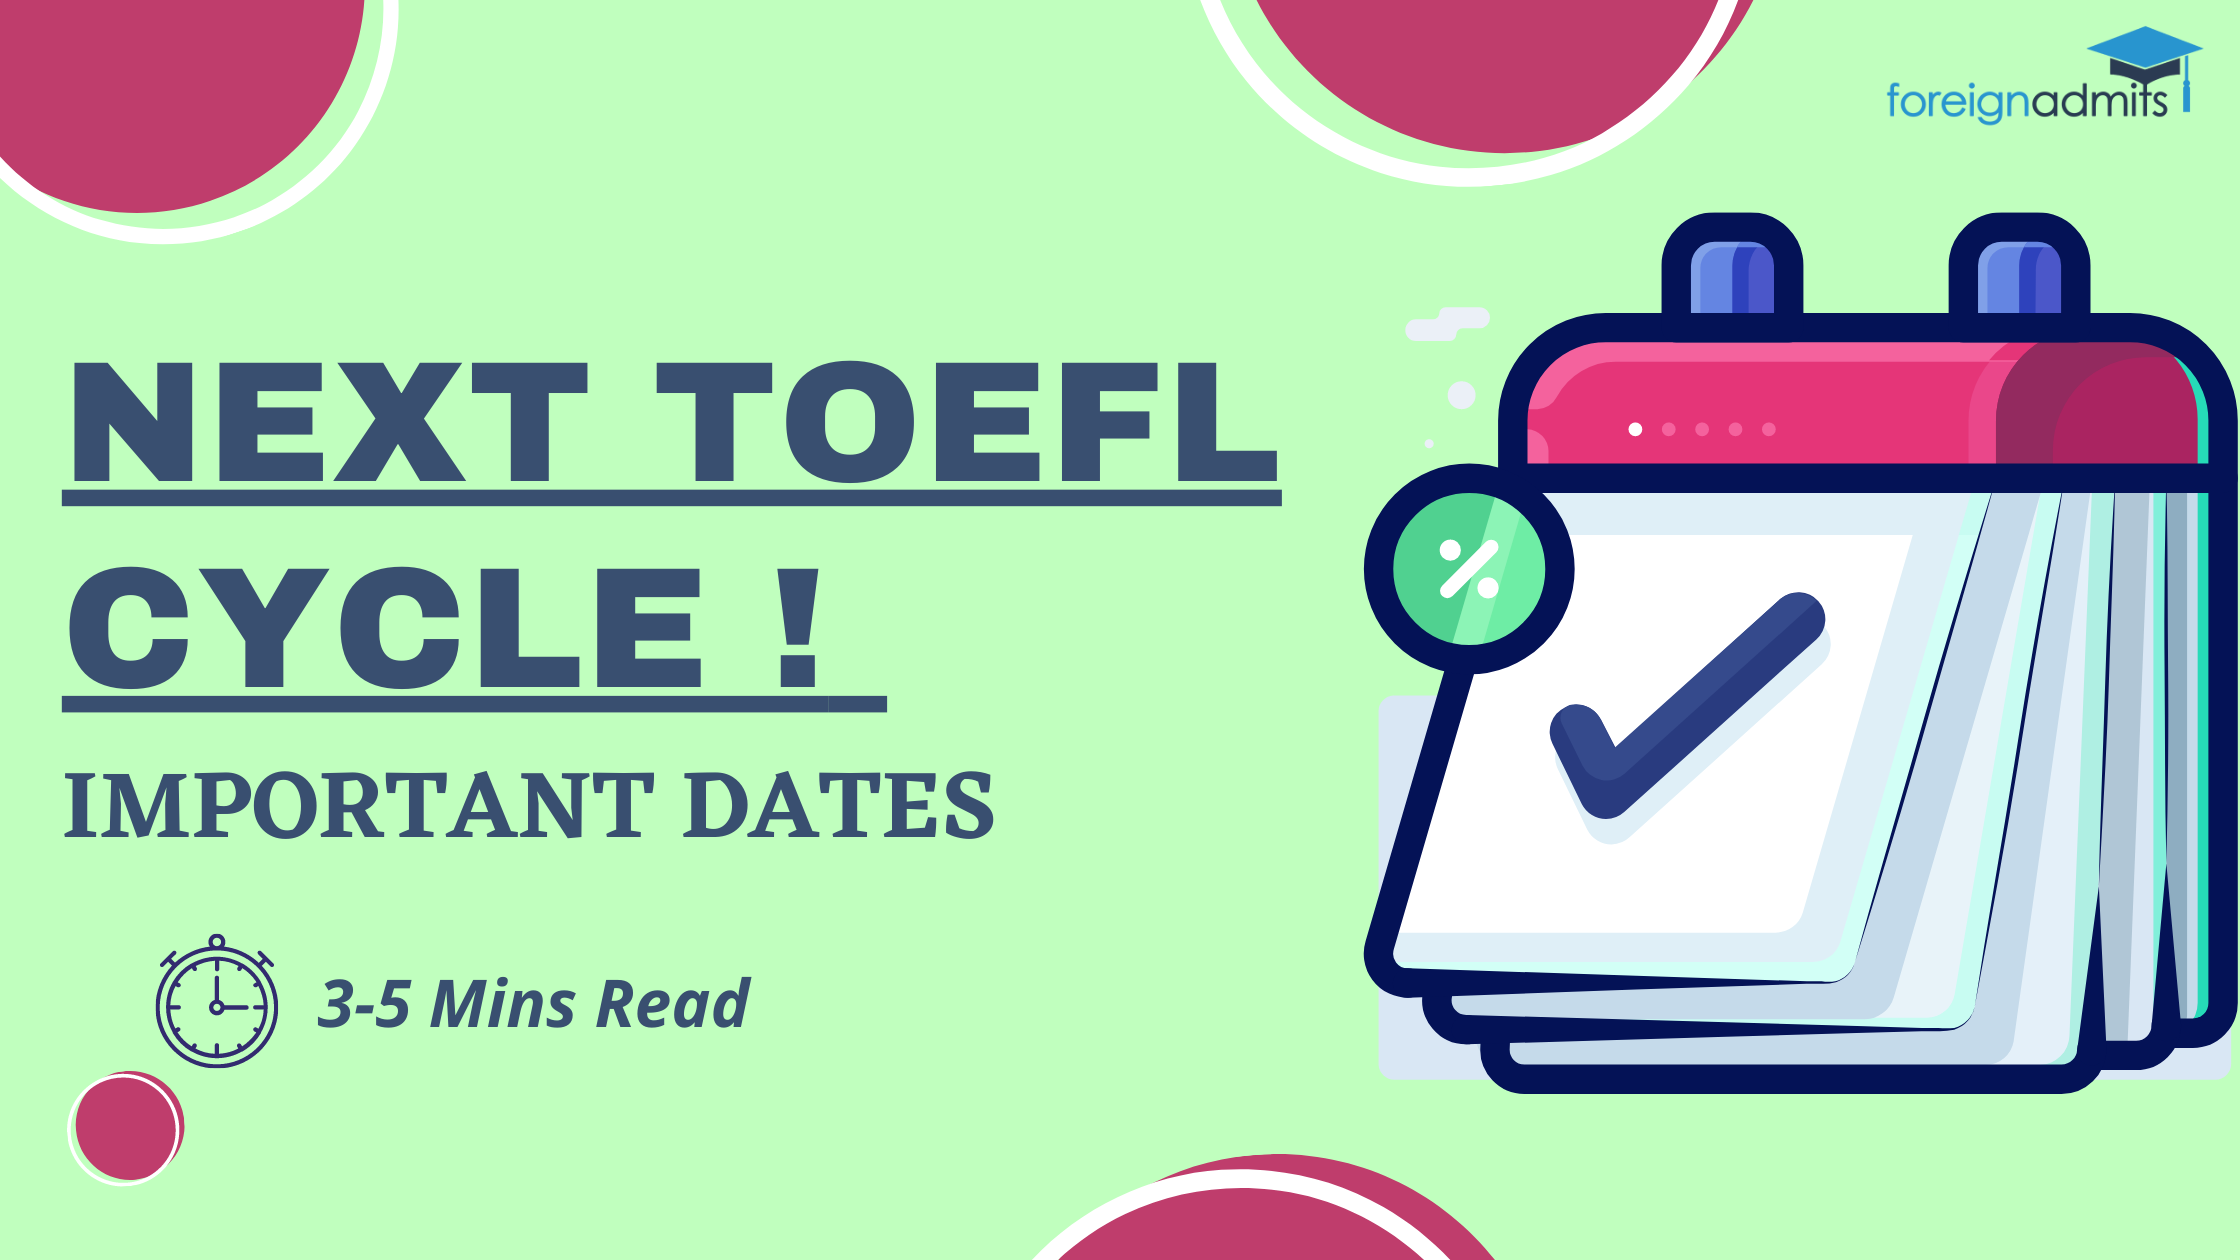 Important Dates for Next TOEFL Cycle